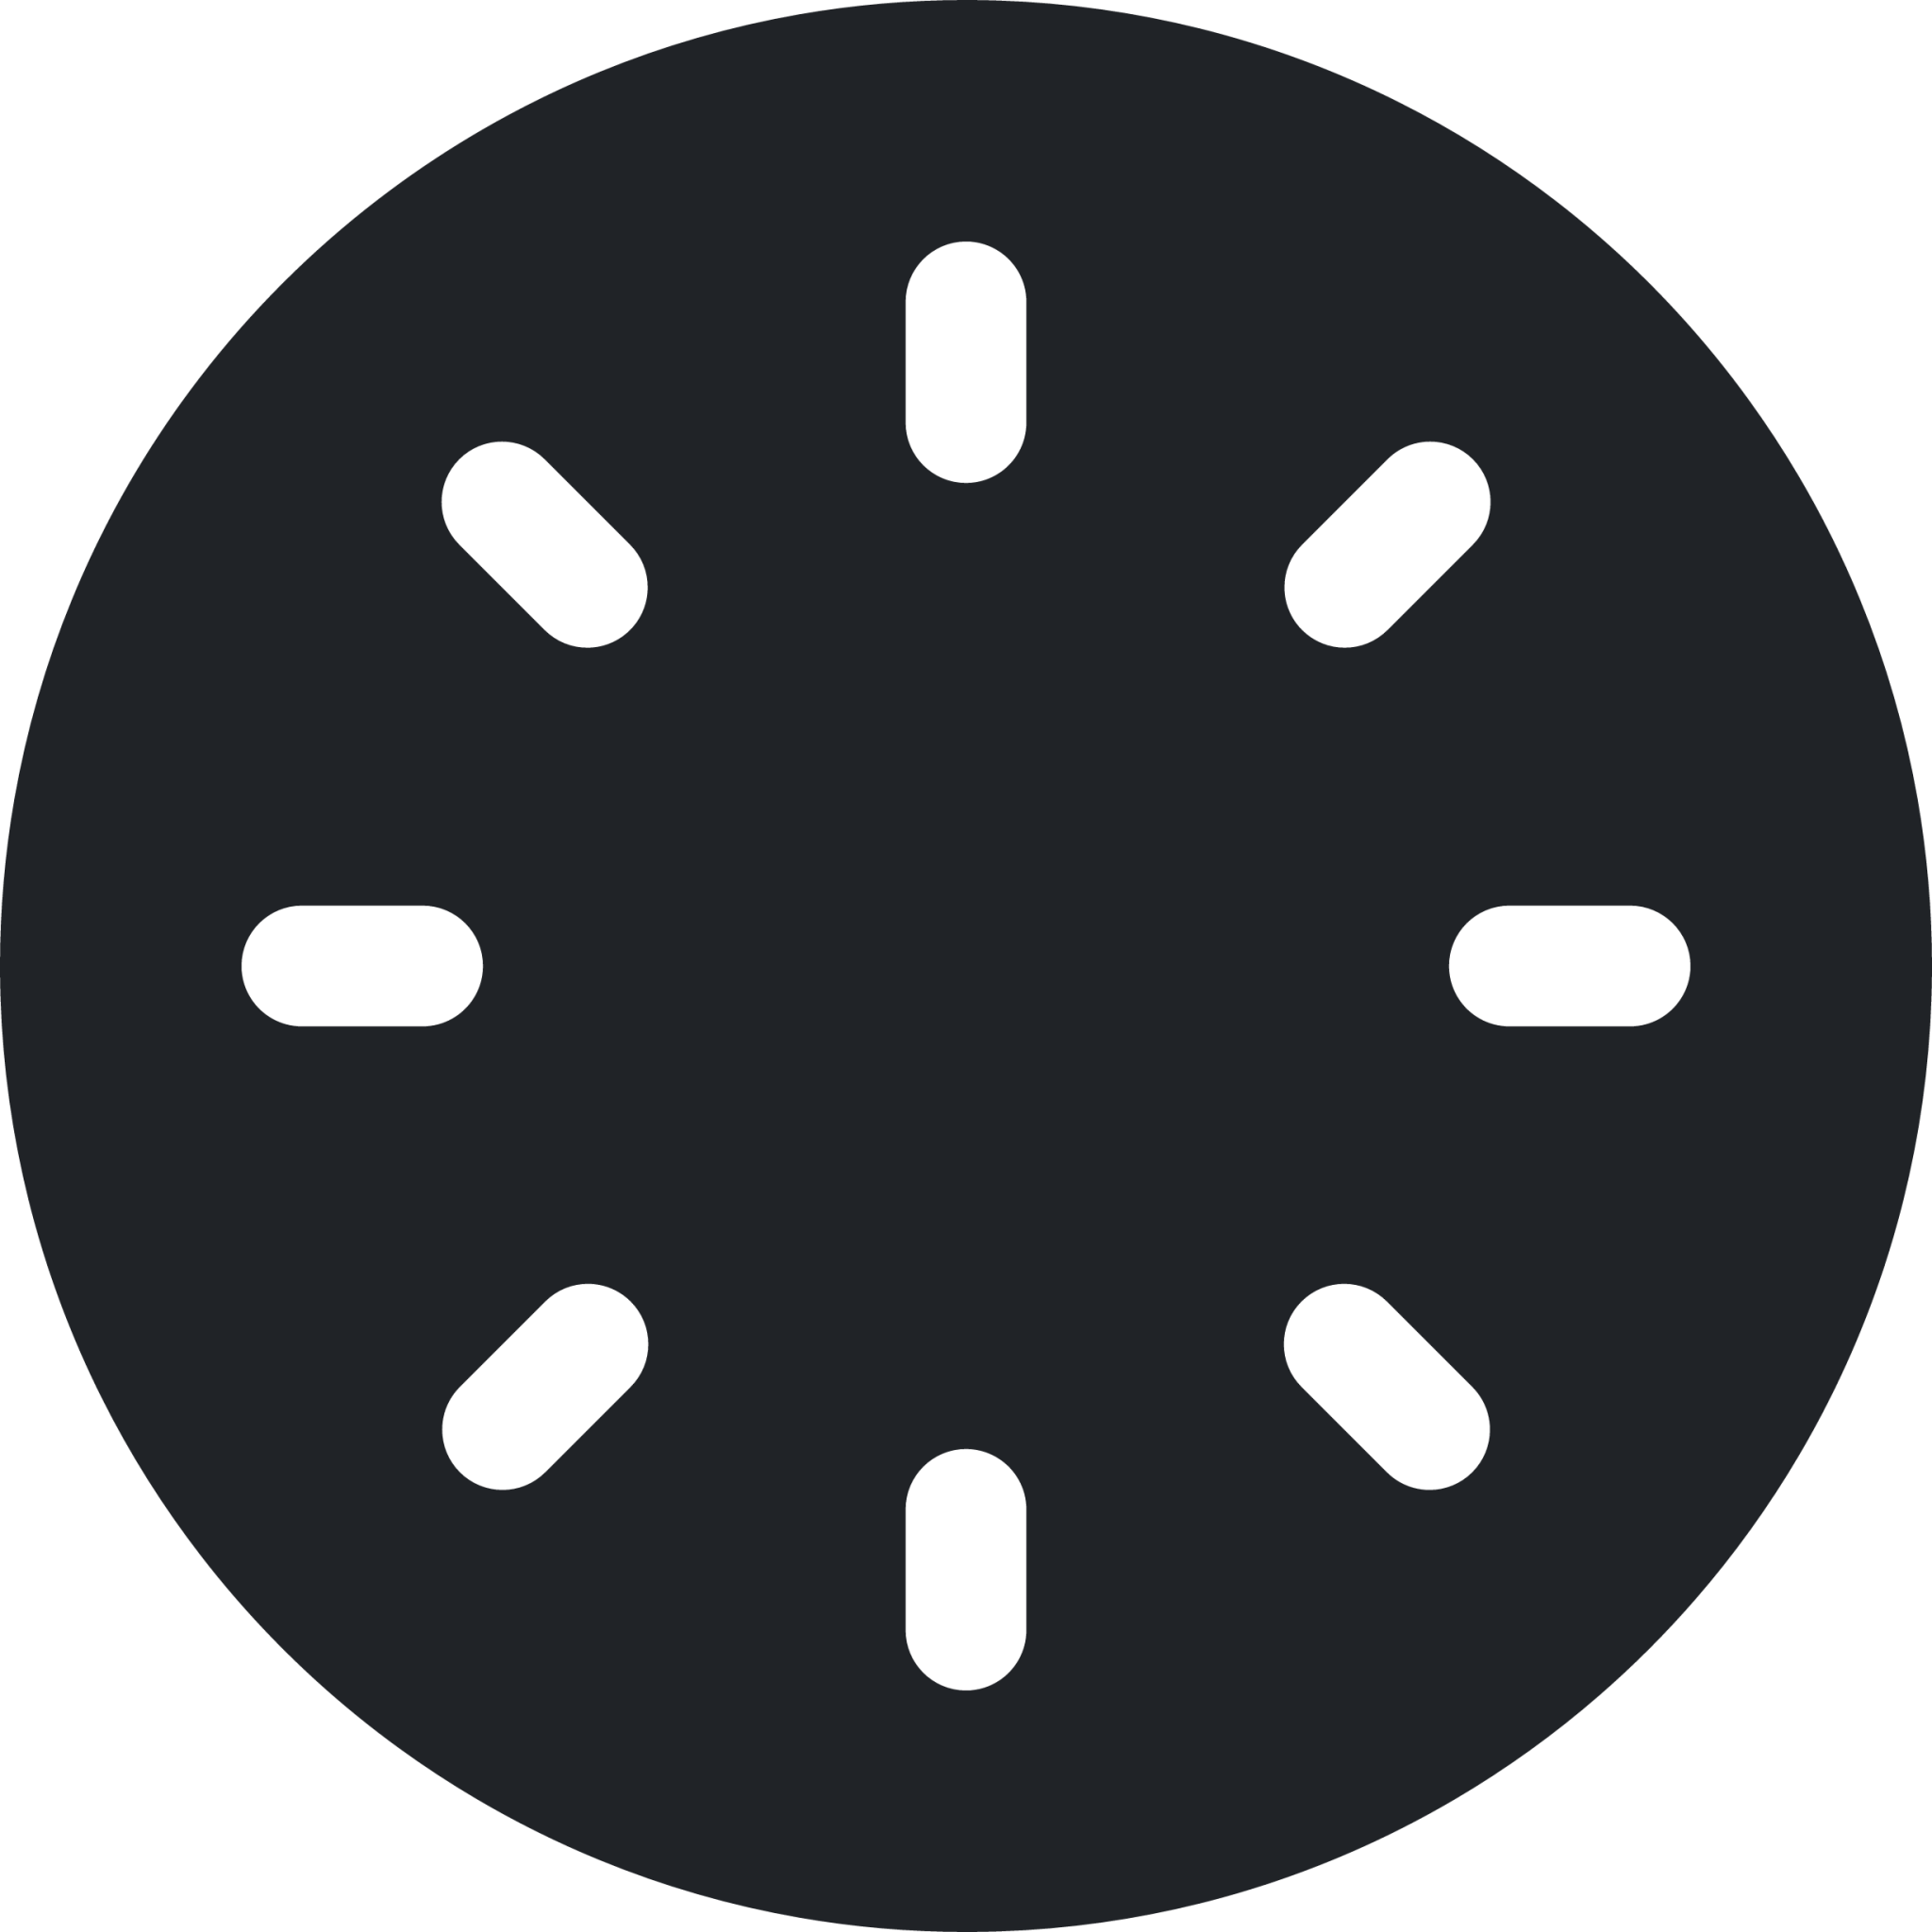 lcircle (rounded filled) icon